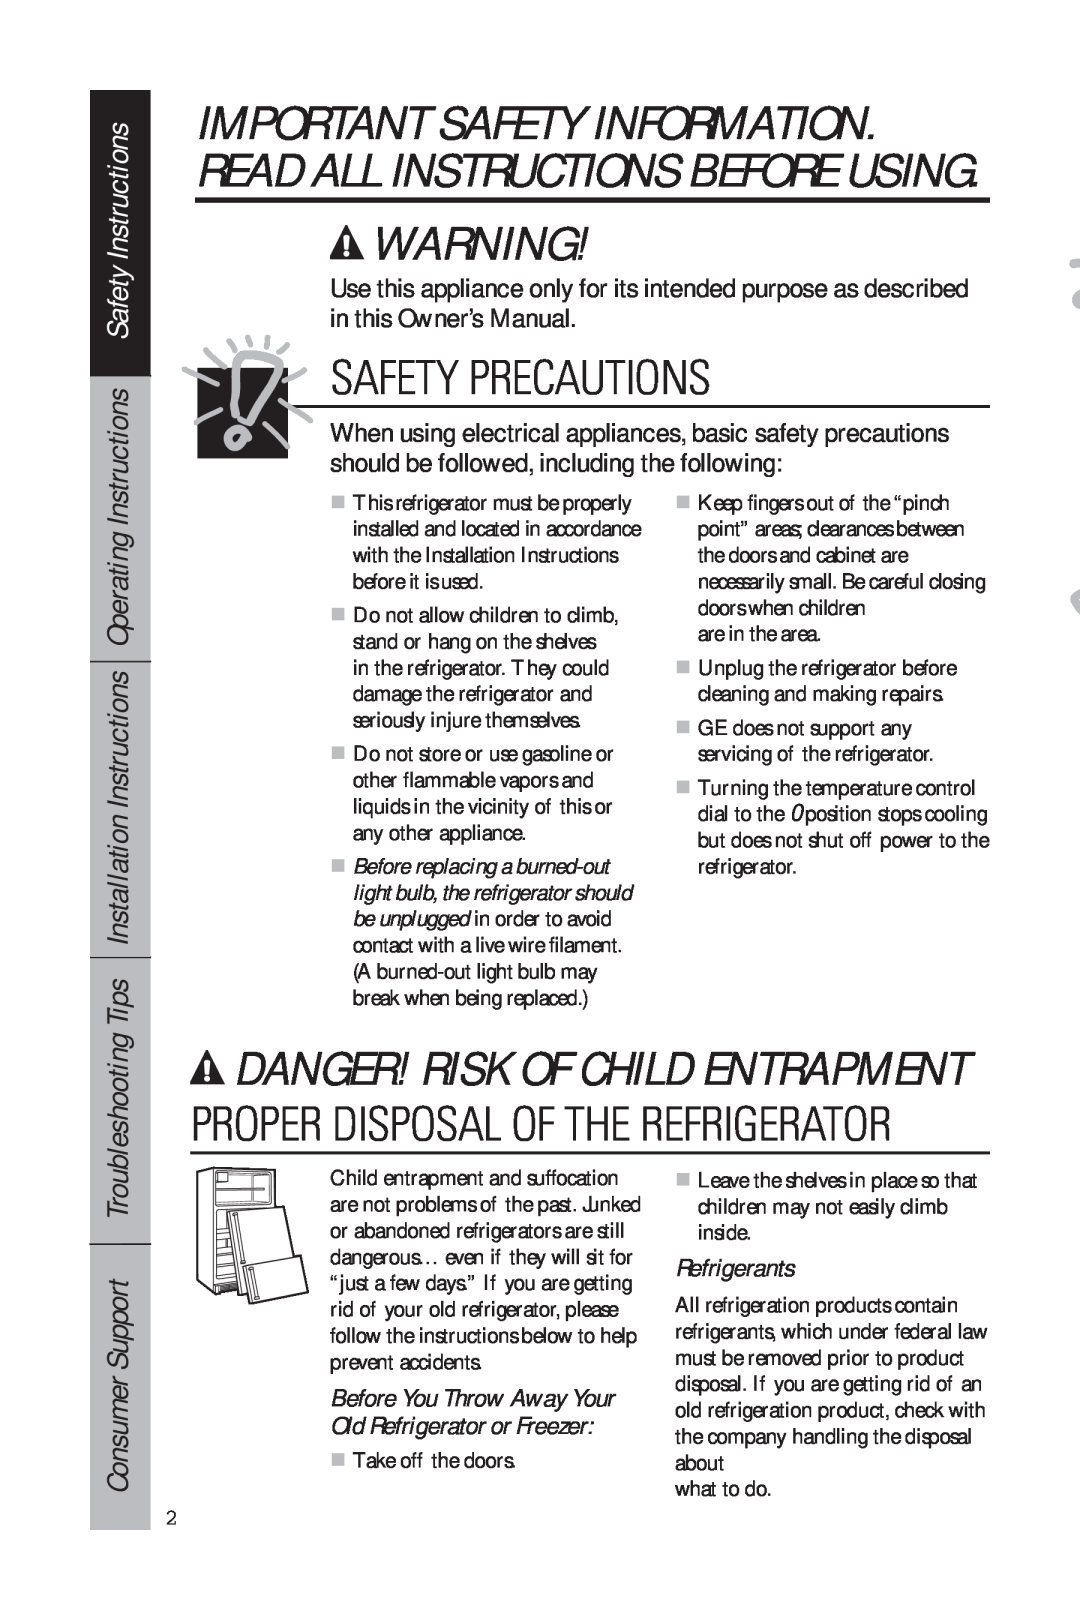 GE 49-60634-1 Safety Precautions, Danger! Risk Of Child Entrapment, Instructions Safety Instructions, Refrigerants 